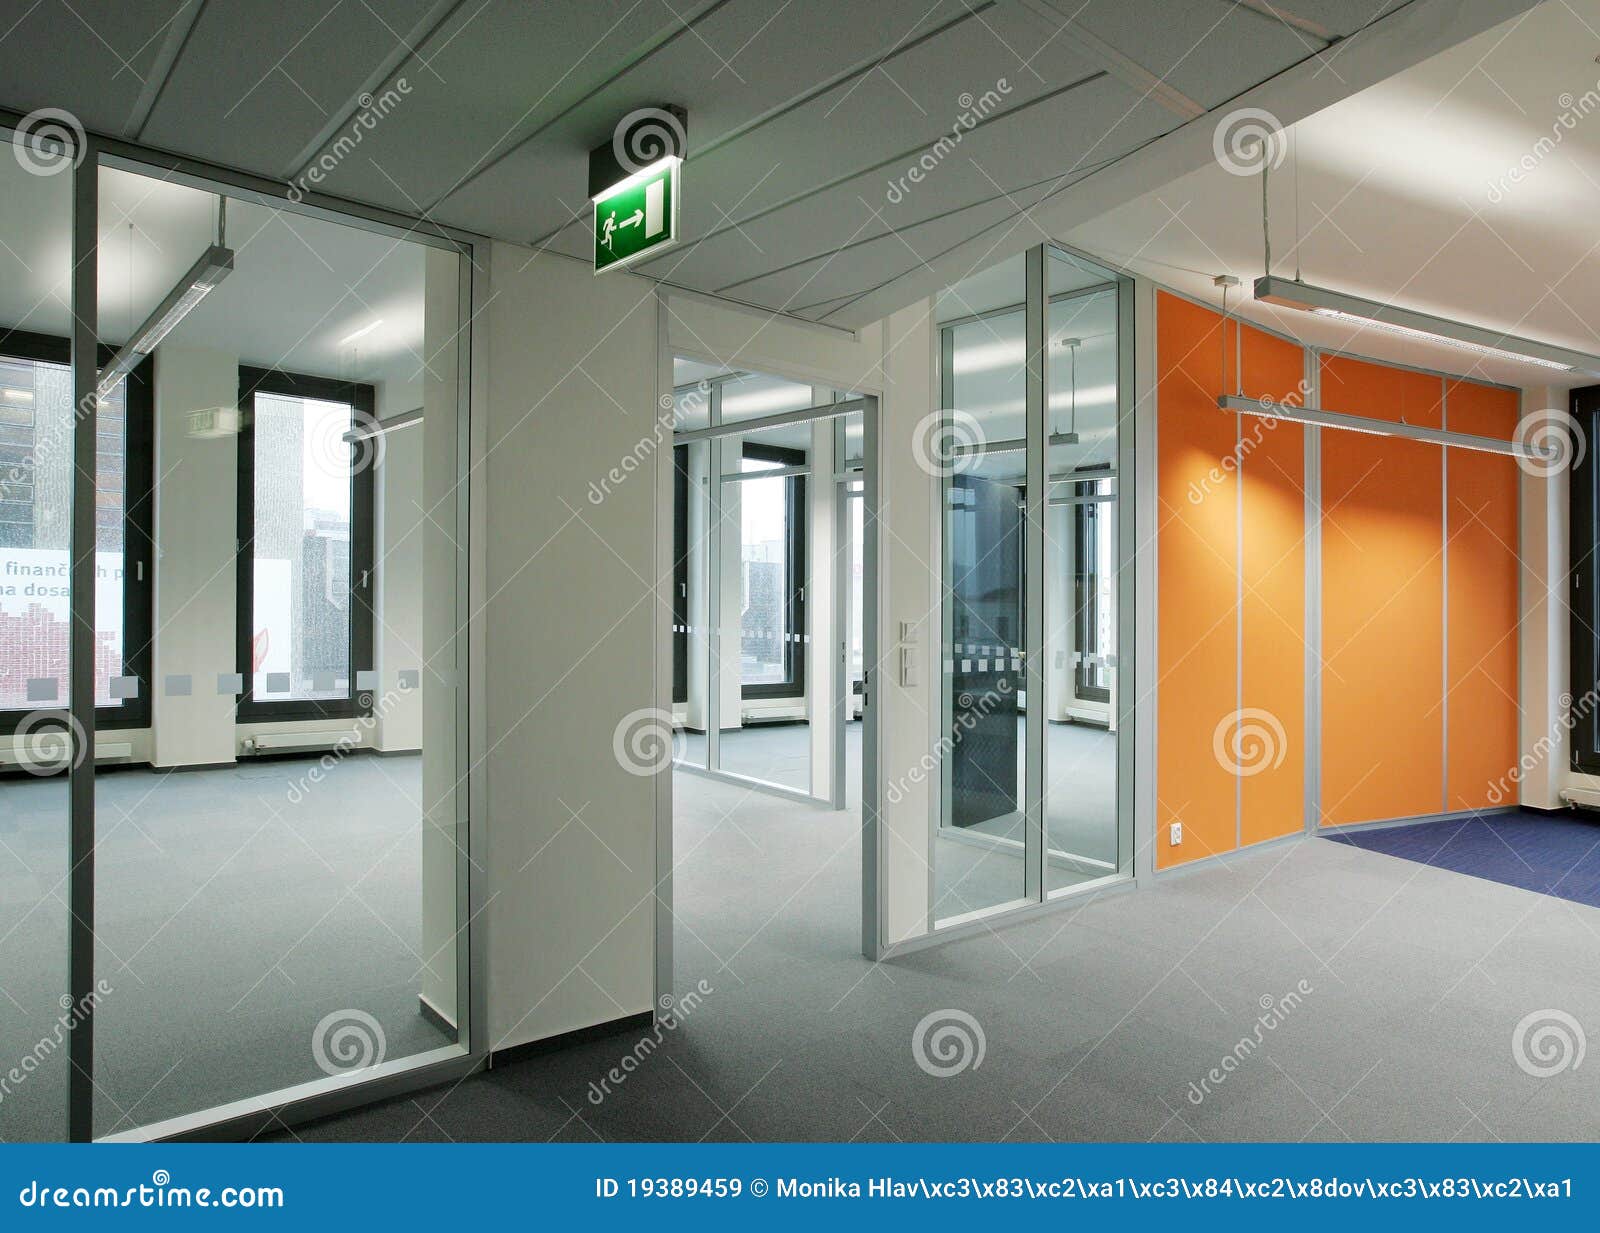 free clipart office space - photo #42